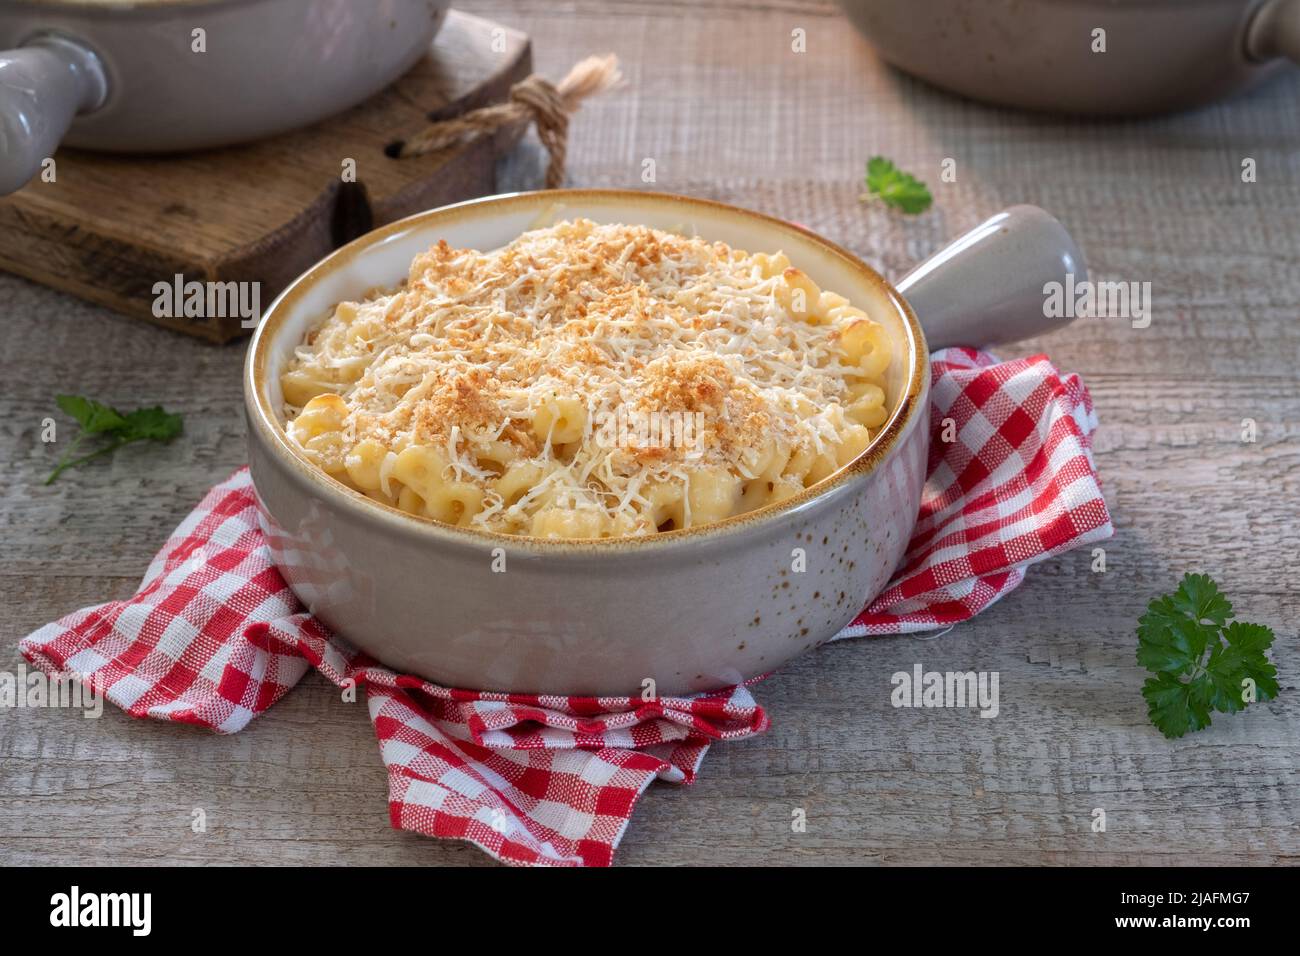 Mac and cheese. traditional american dish macaroni pasta and a cheese sauce Stock Photo